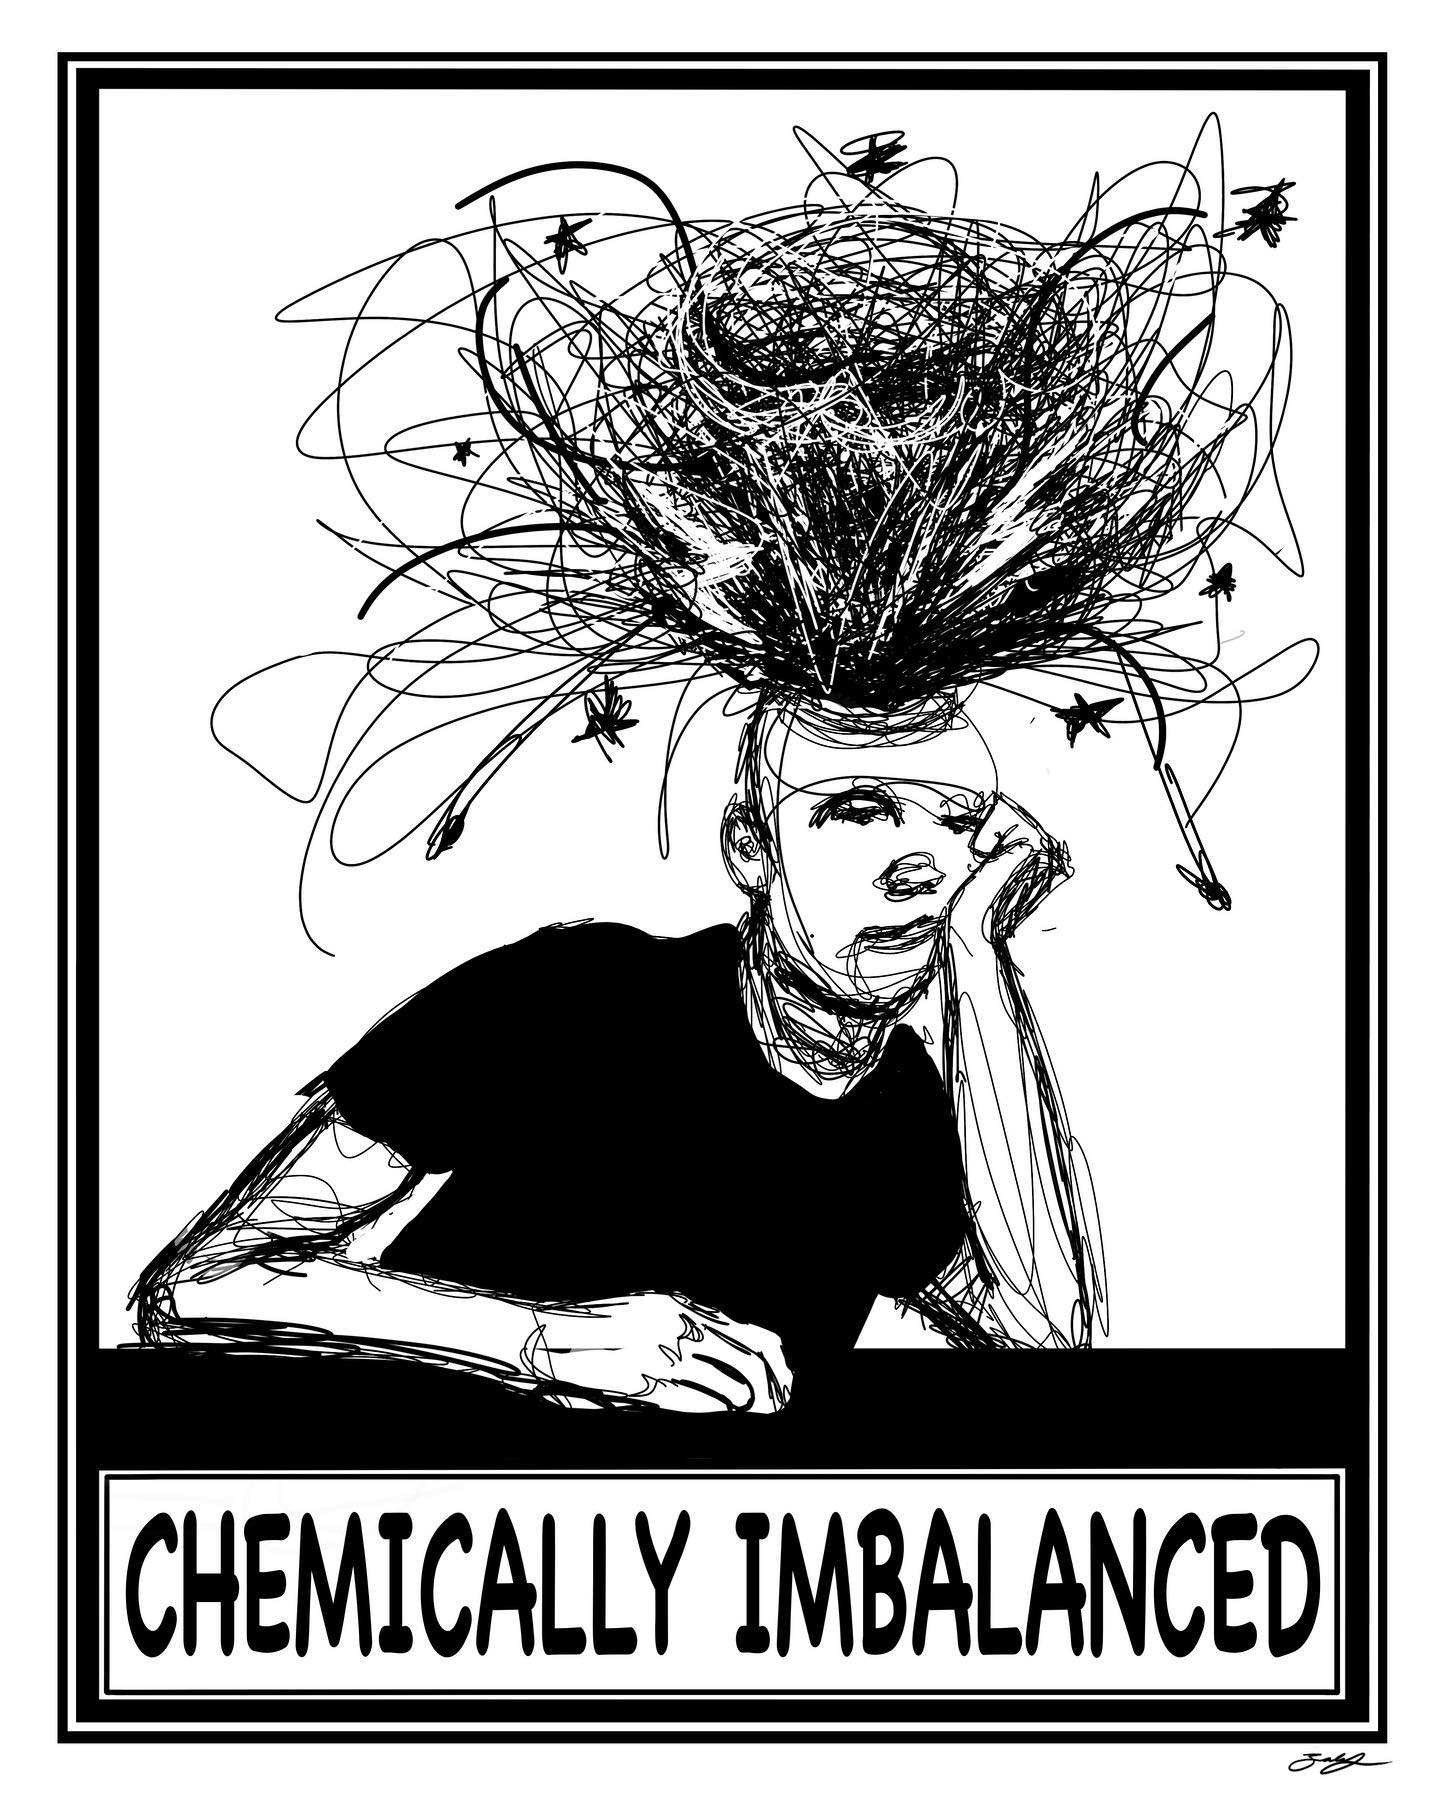 “Chemically Imbalanced” 

I’m currently trying to build a community around my artwork and mission on discord. Here we ca